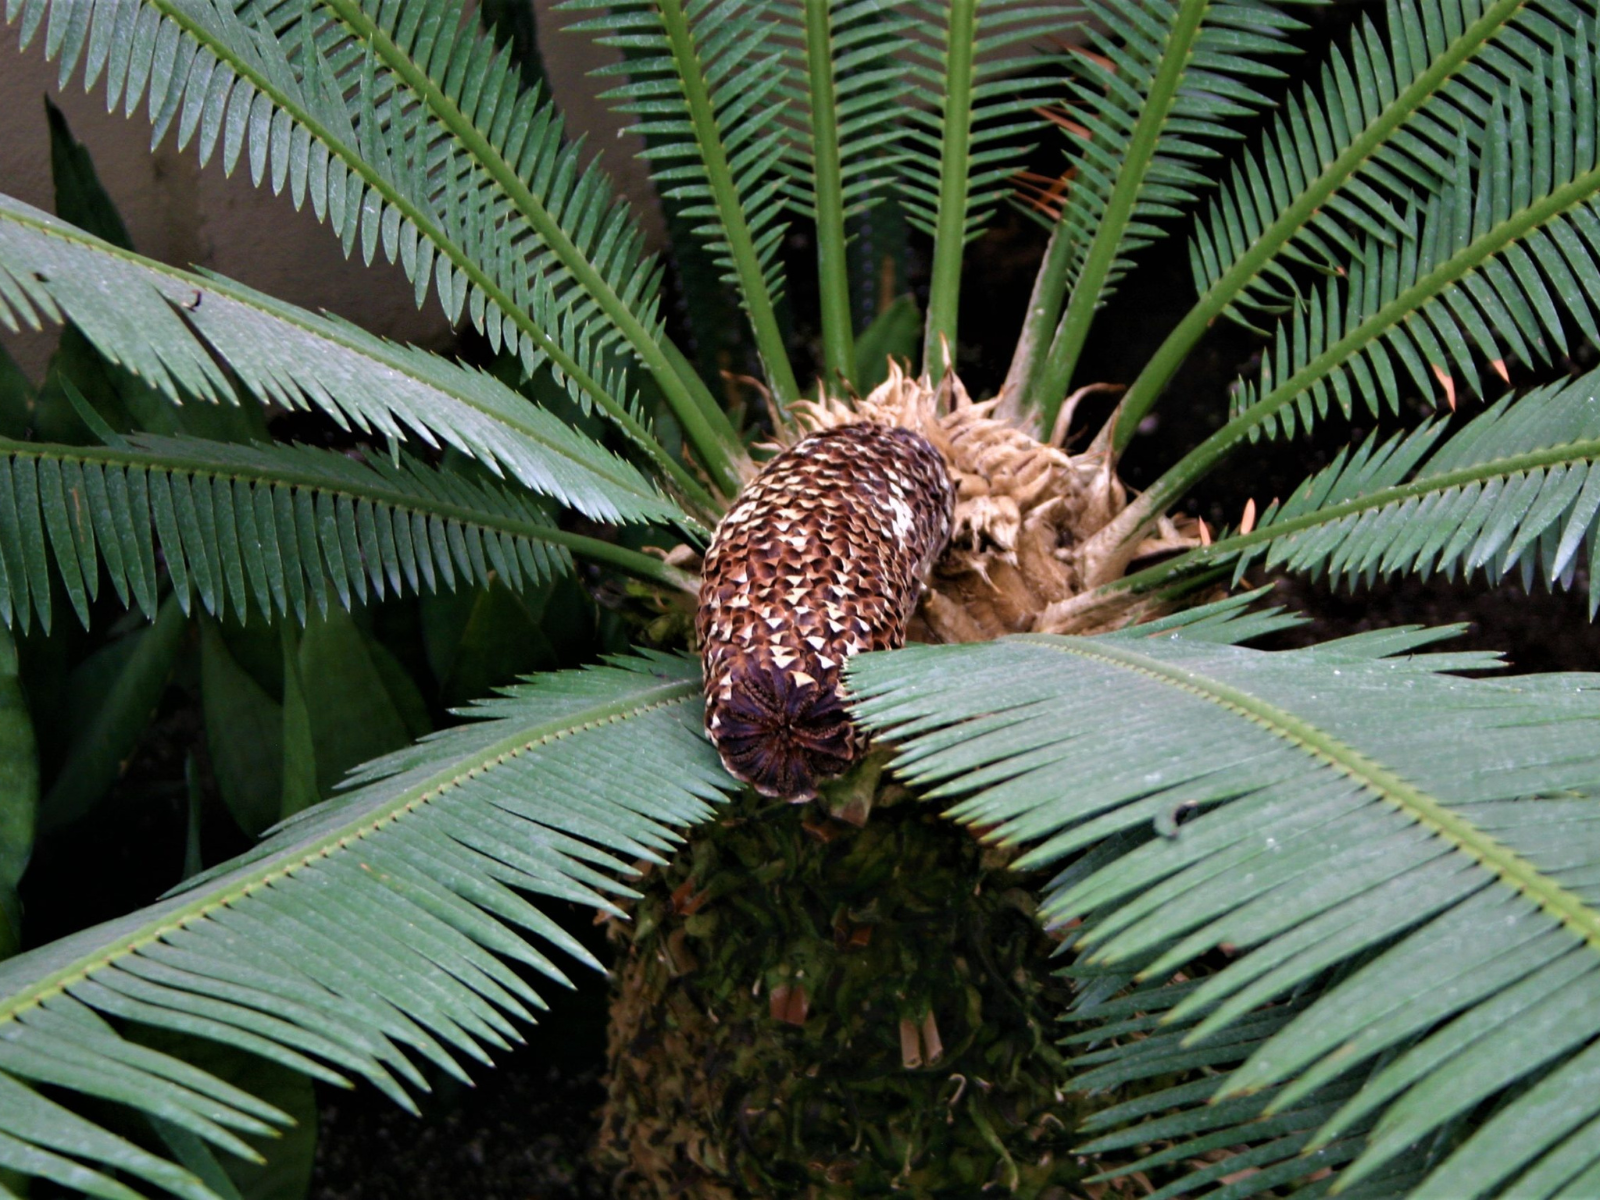 Close-up on the centre of a fern with an oblong-shaped red-brown cone growing out from the centre point.